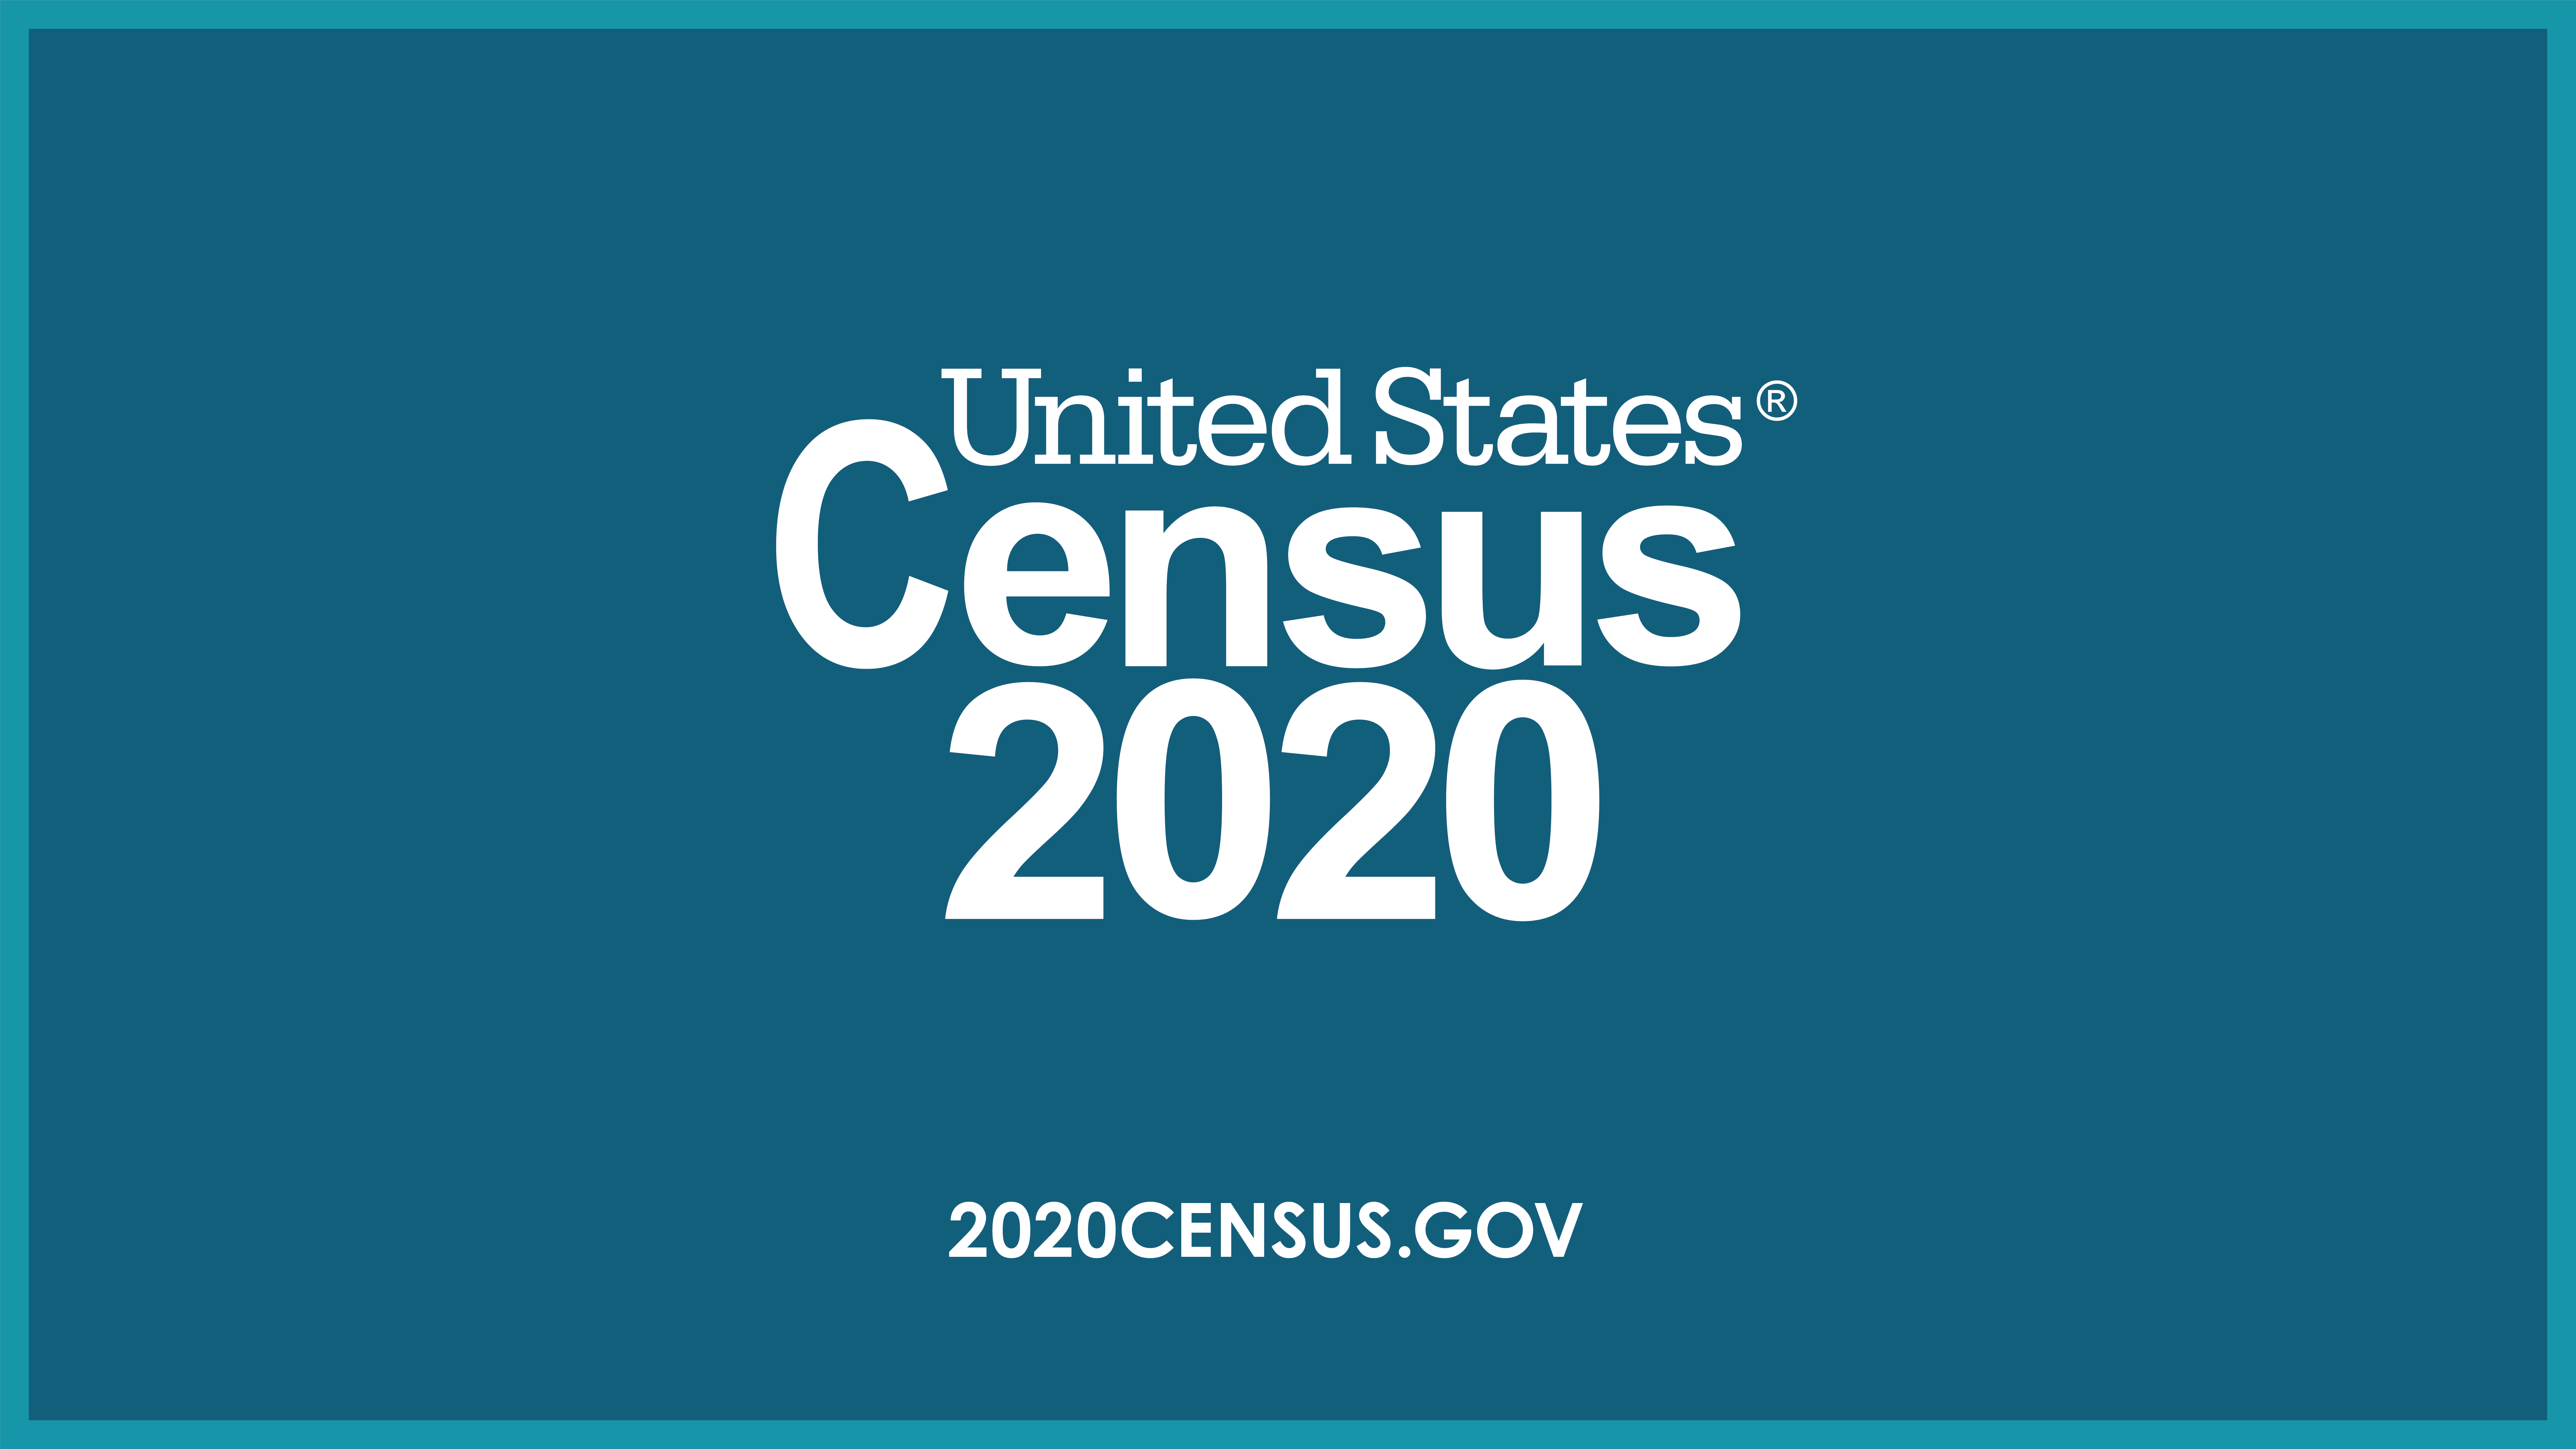 White text on teal background reading United States Census 2020